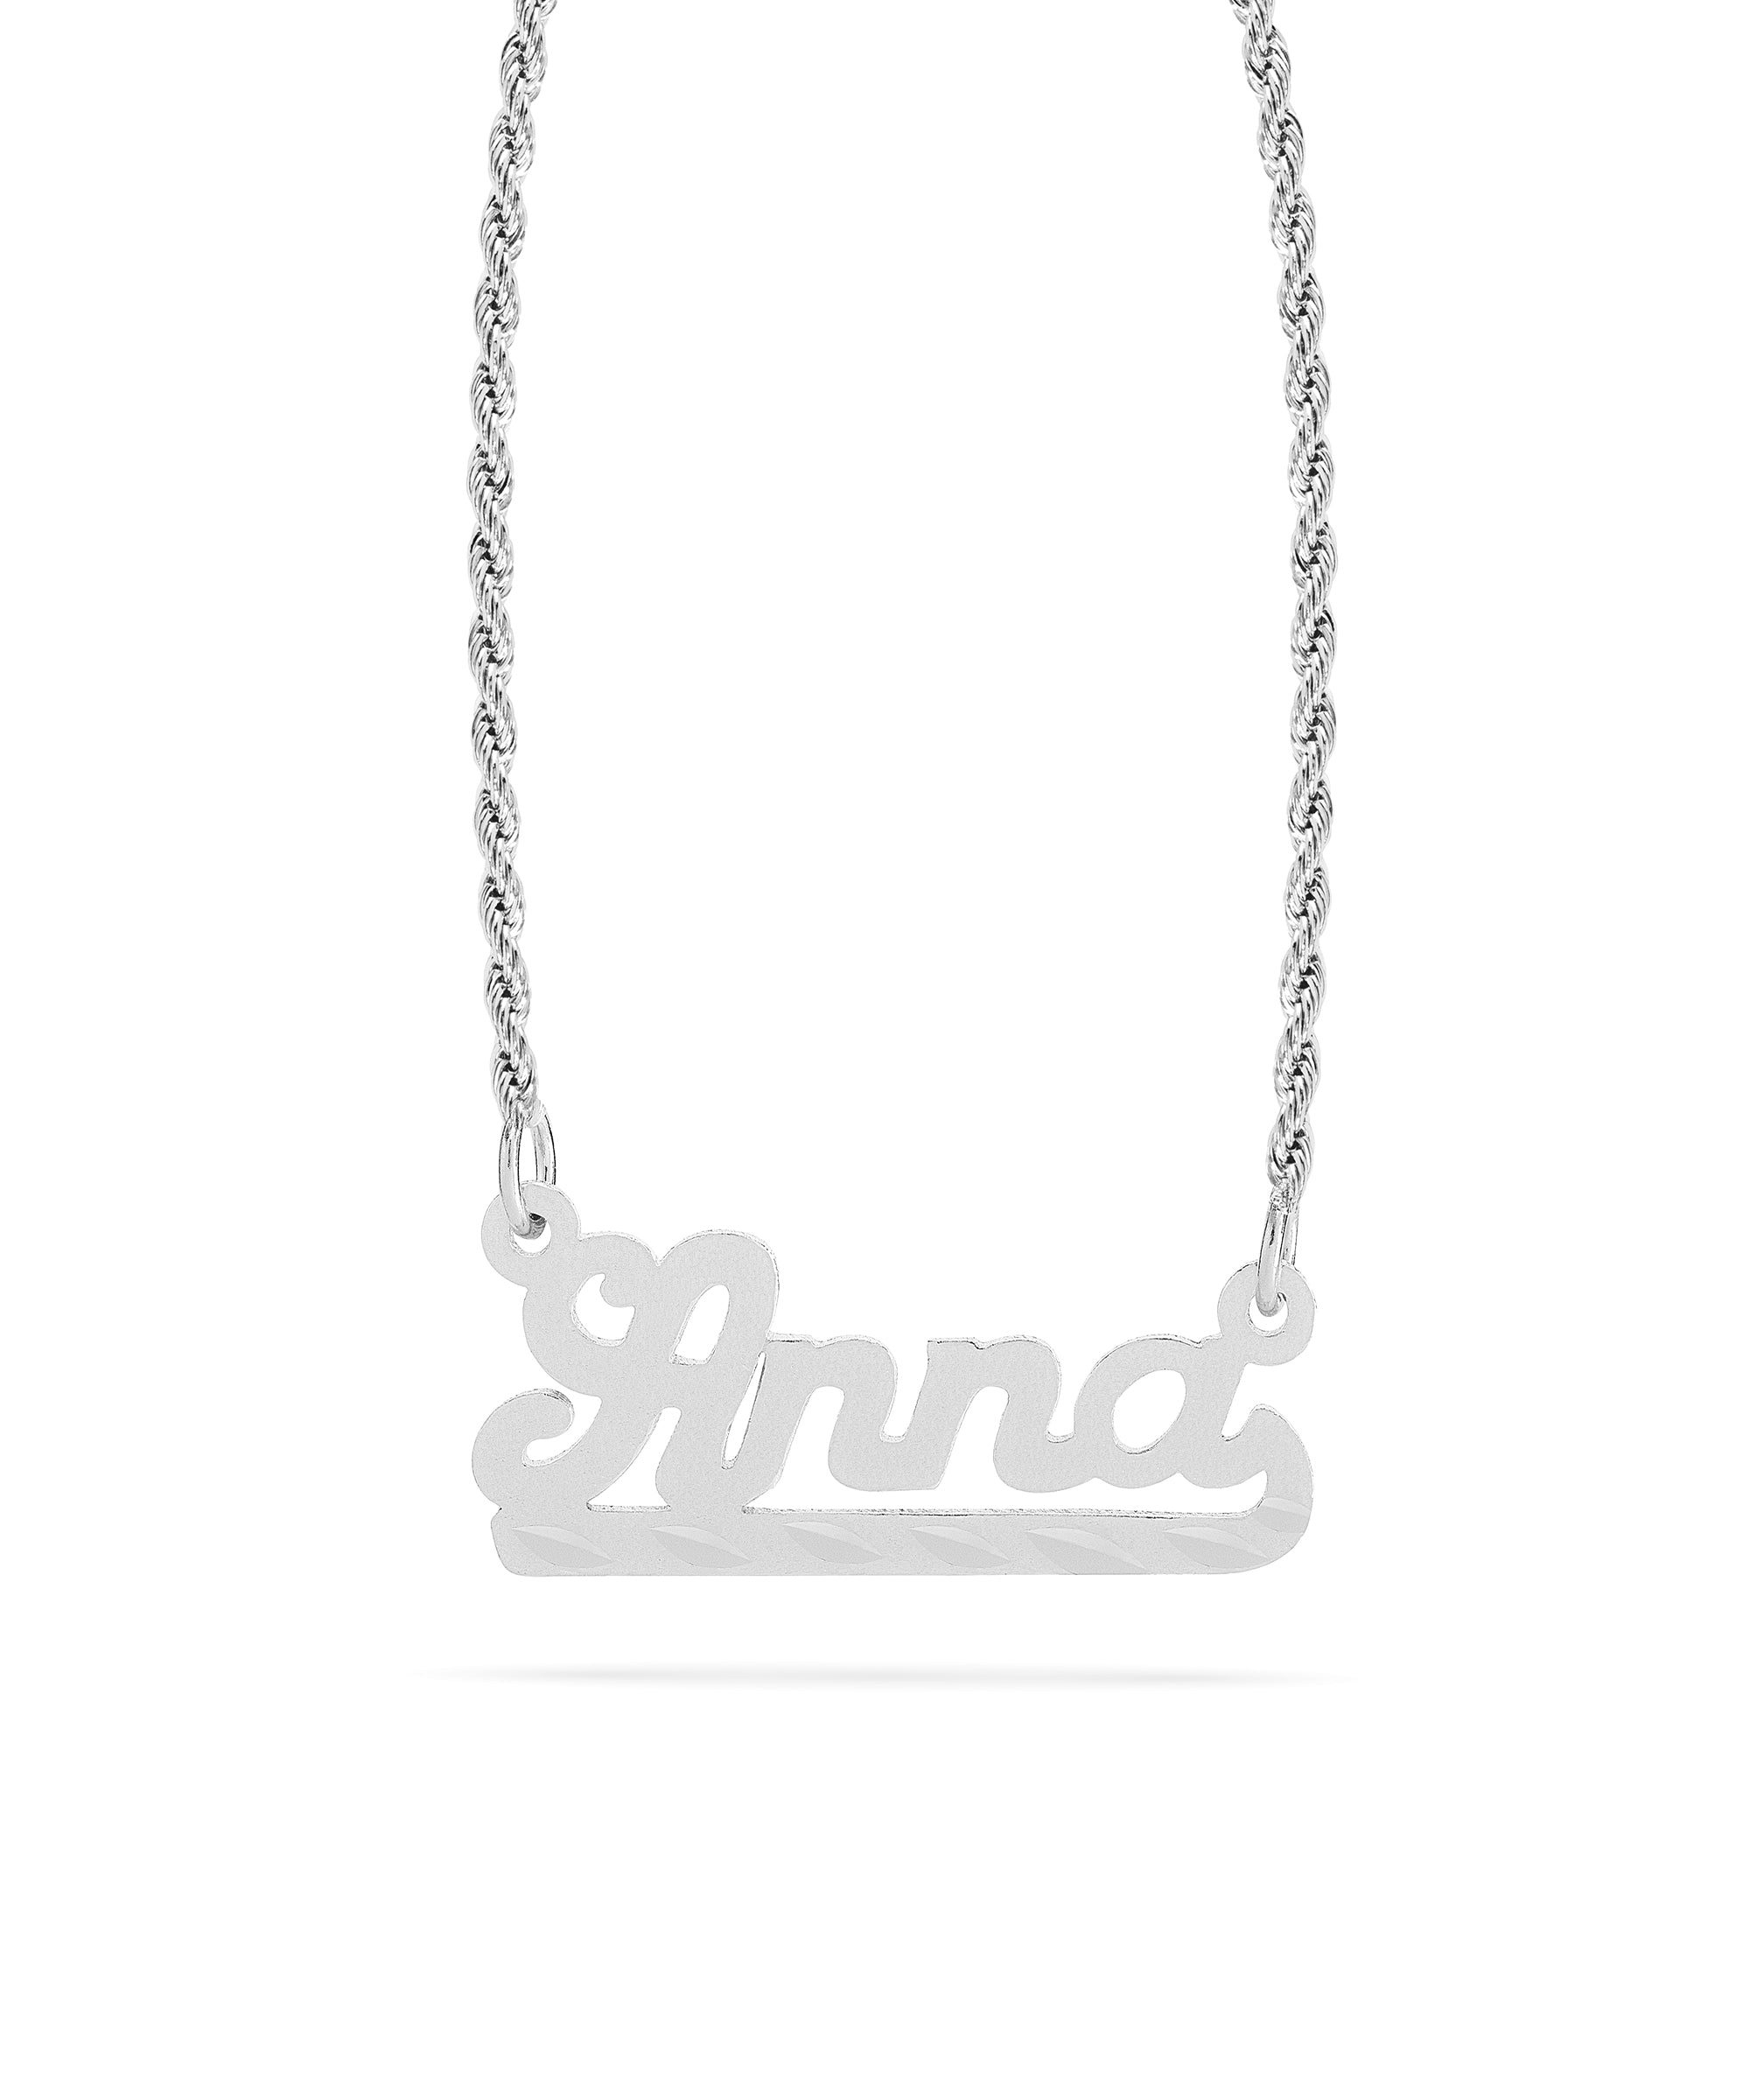 Personalized Name necklace with  Diamond Cut and Satin Finish "Anna"